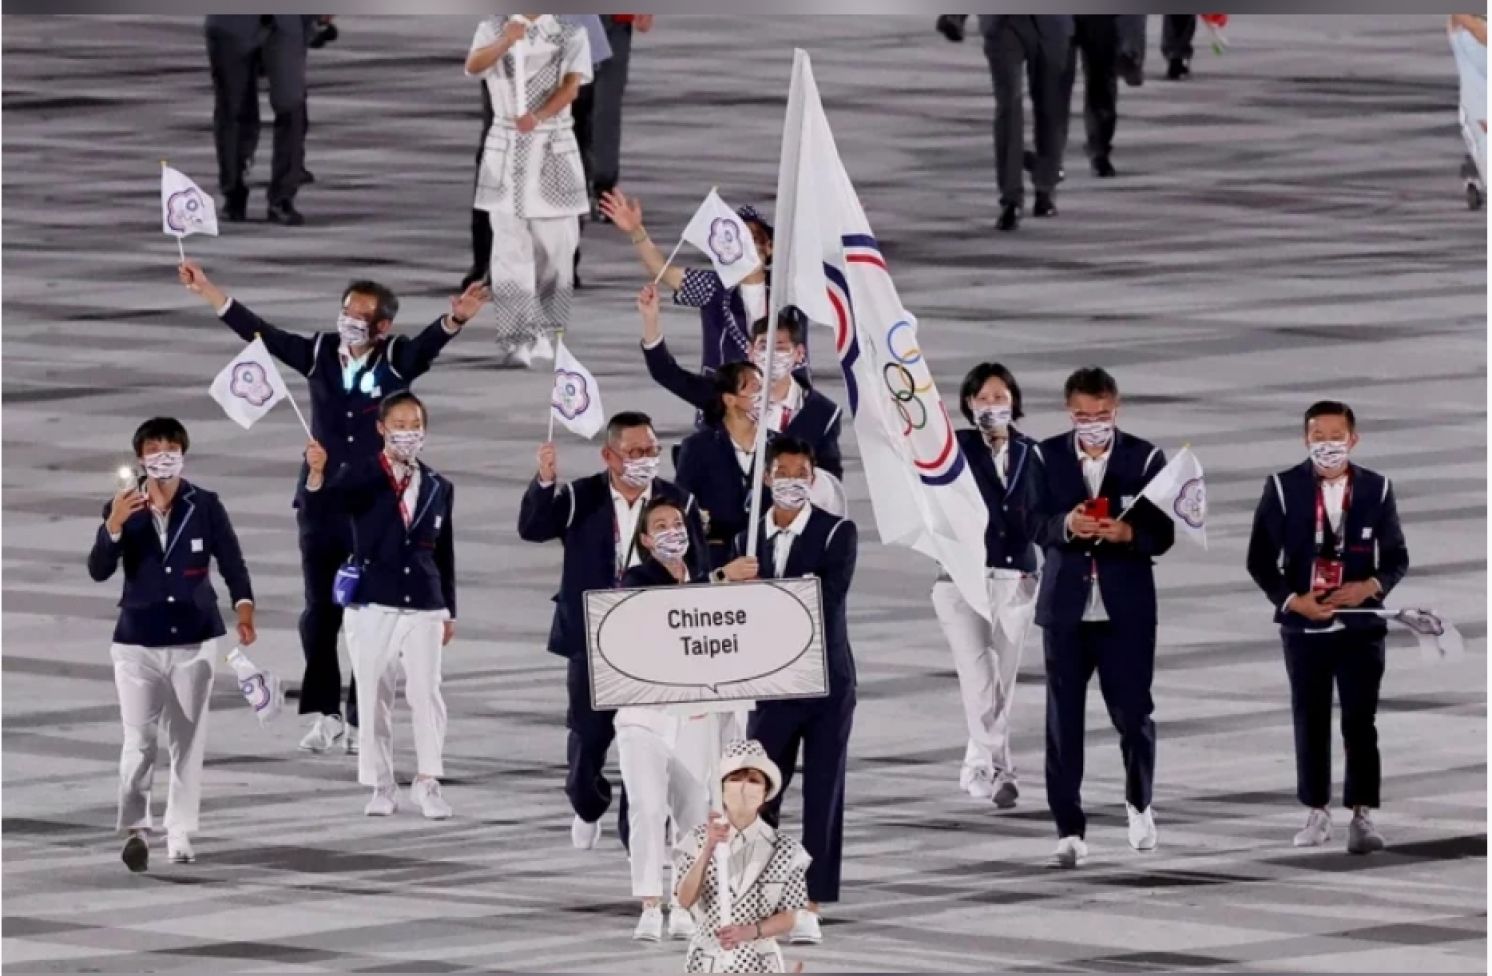 Put Nationalist Sentiment to Rest and Honor the Olympic Spirit